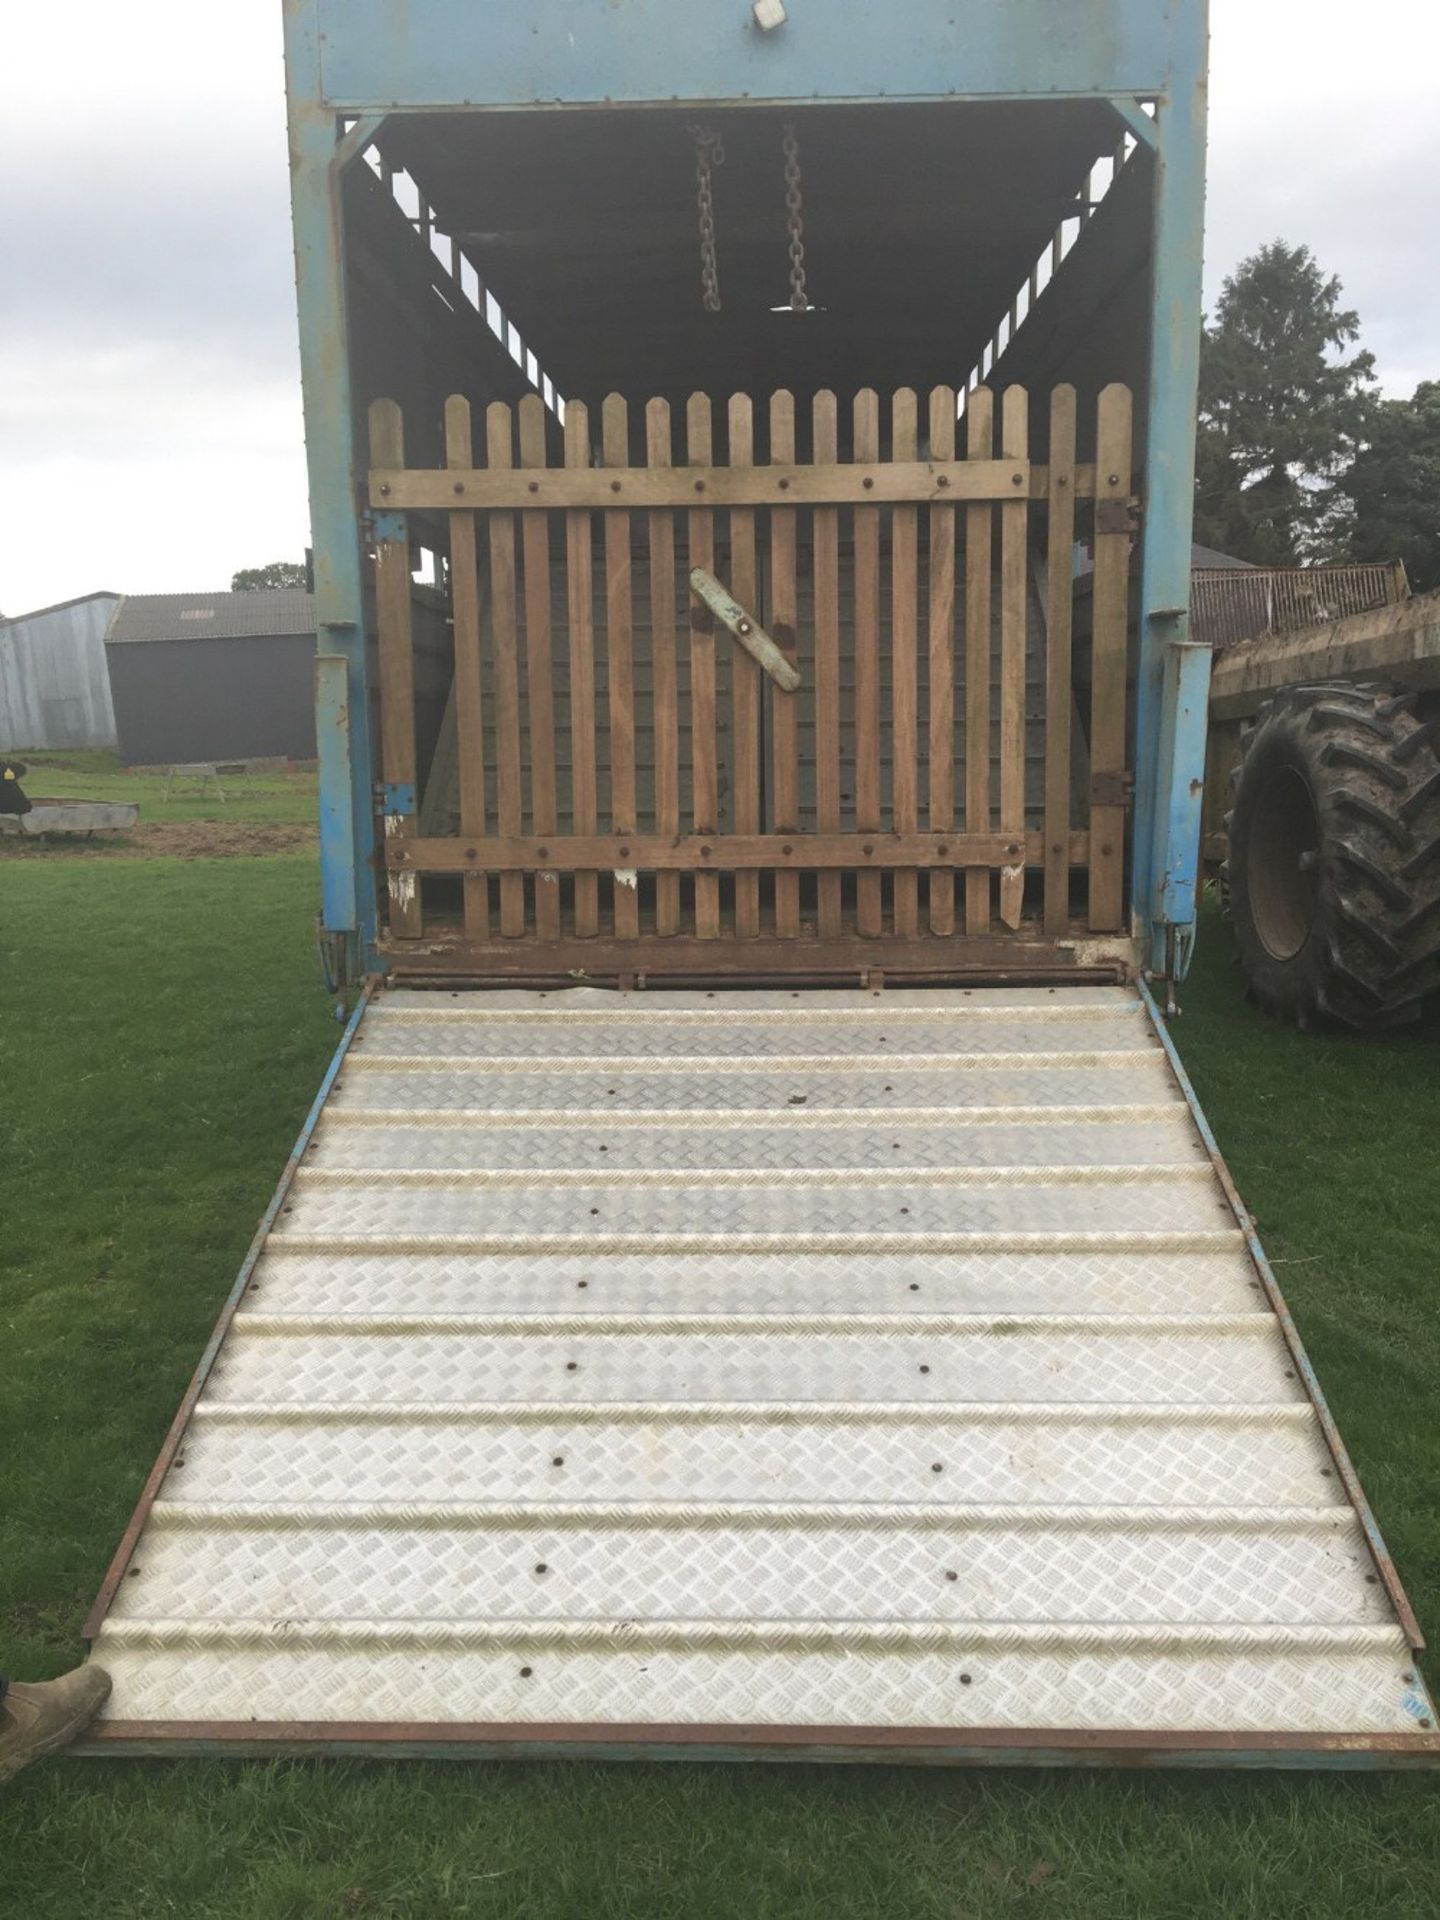 24ft 2deck livestock box with alloy decks - Image 5 of 5